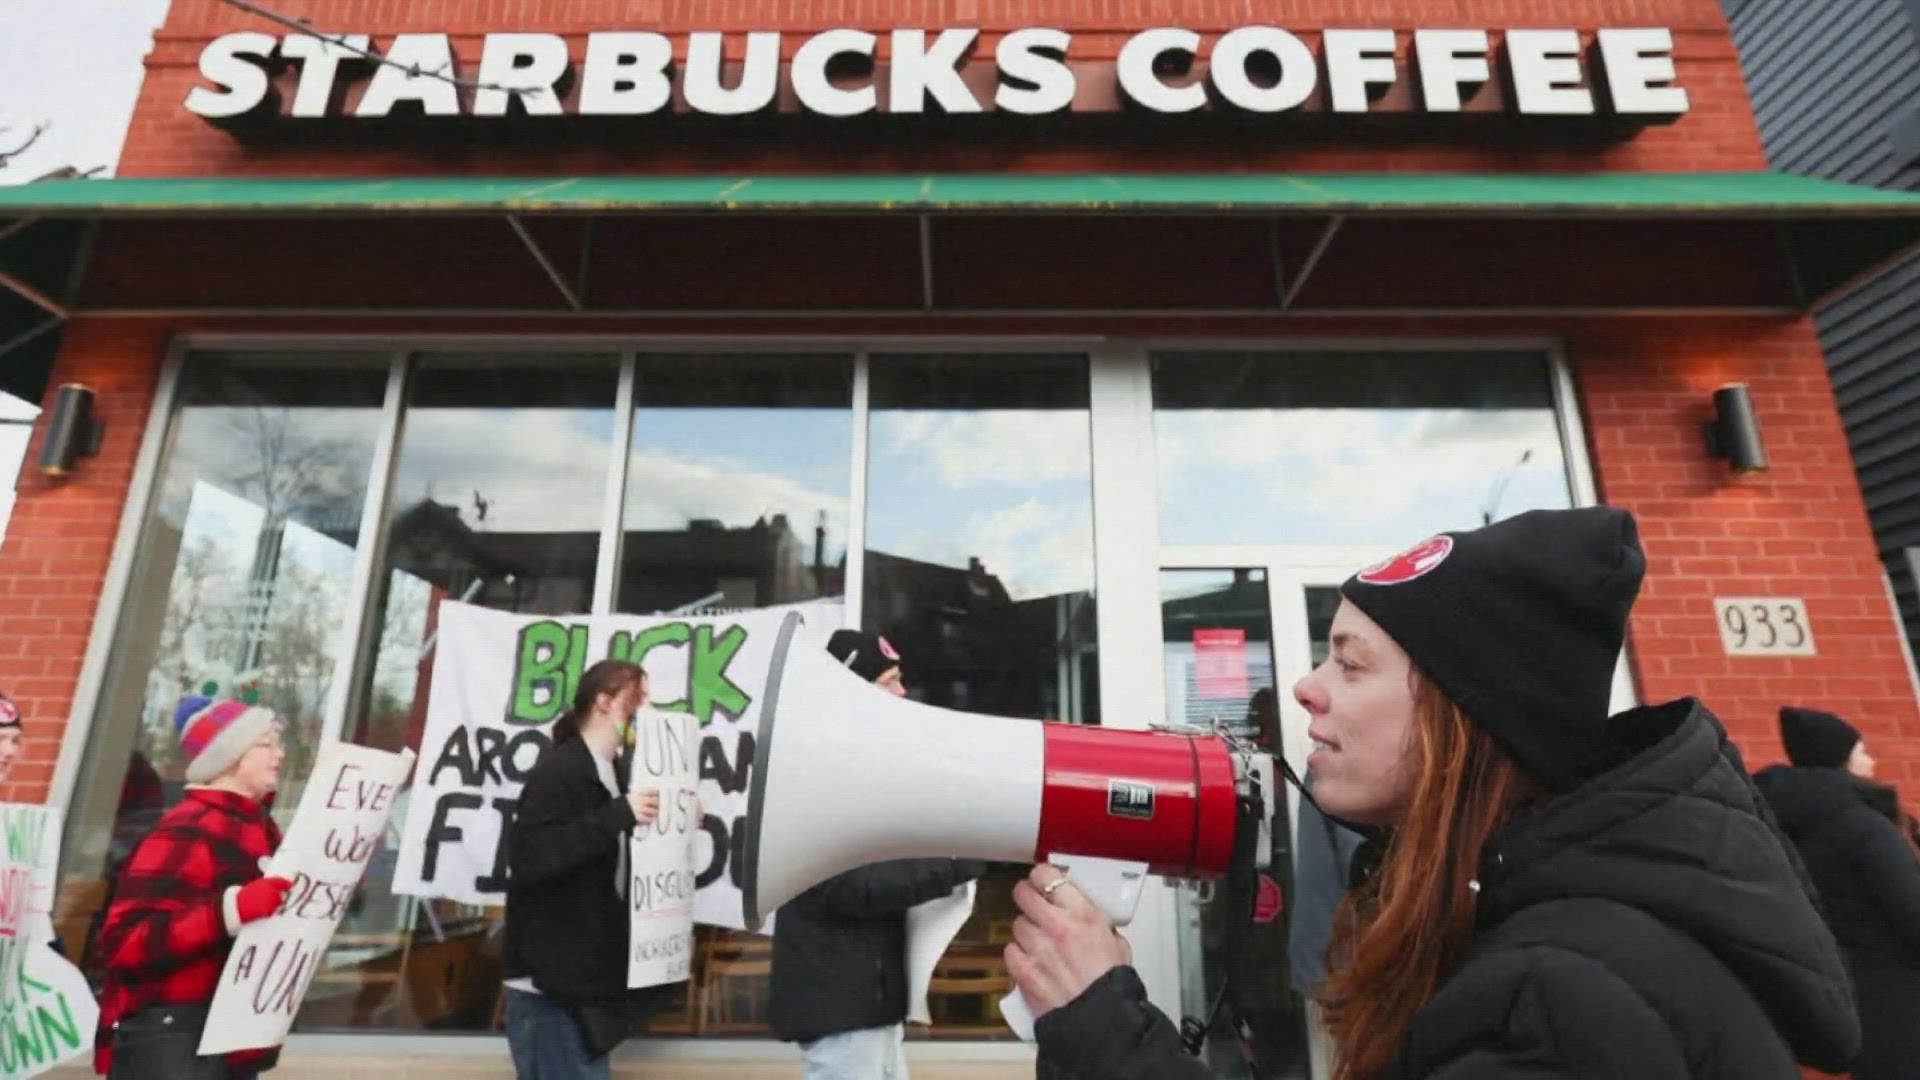 More than 5,000 employees are expected to strike during Thursday's promotional event at Starbucks stores nationwide.